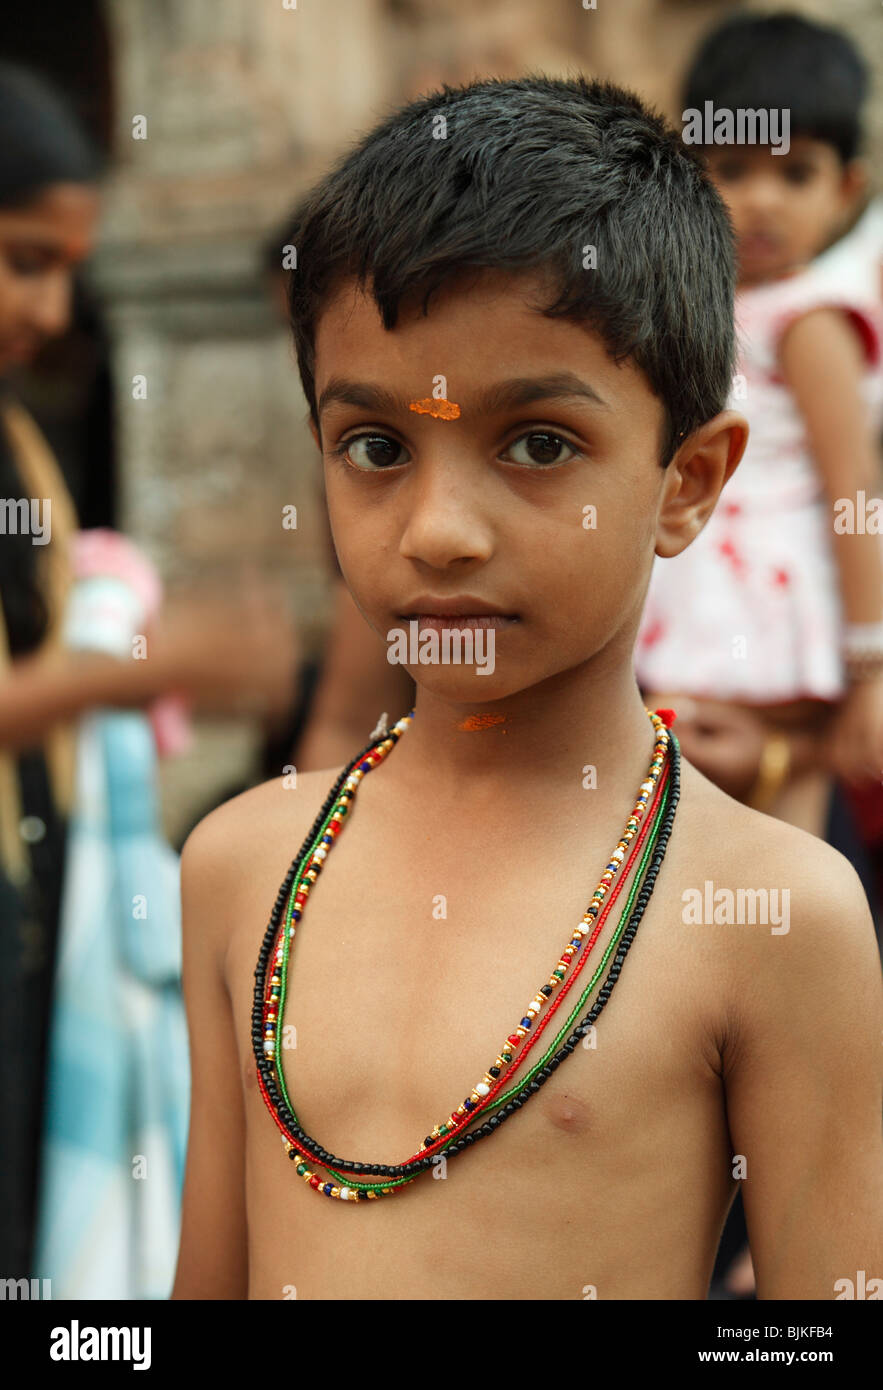 Boy with necklace in front of the temple, Trivandrum, Thiruvananthapuram, Kerala state, India, Asia Stock Photo